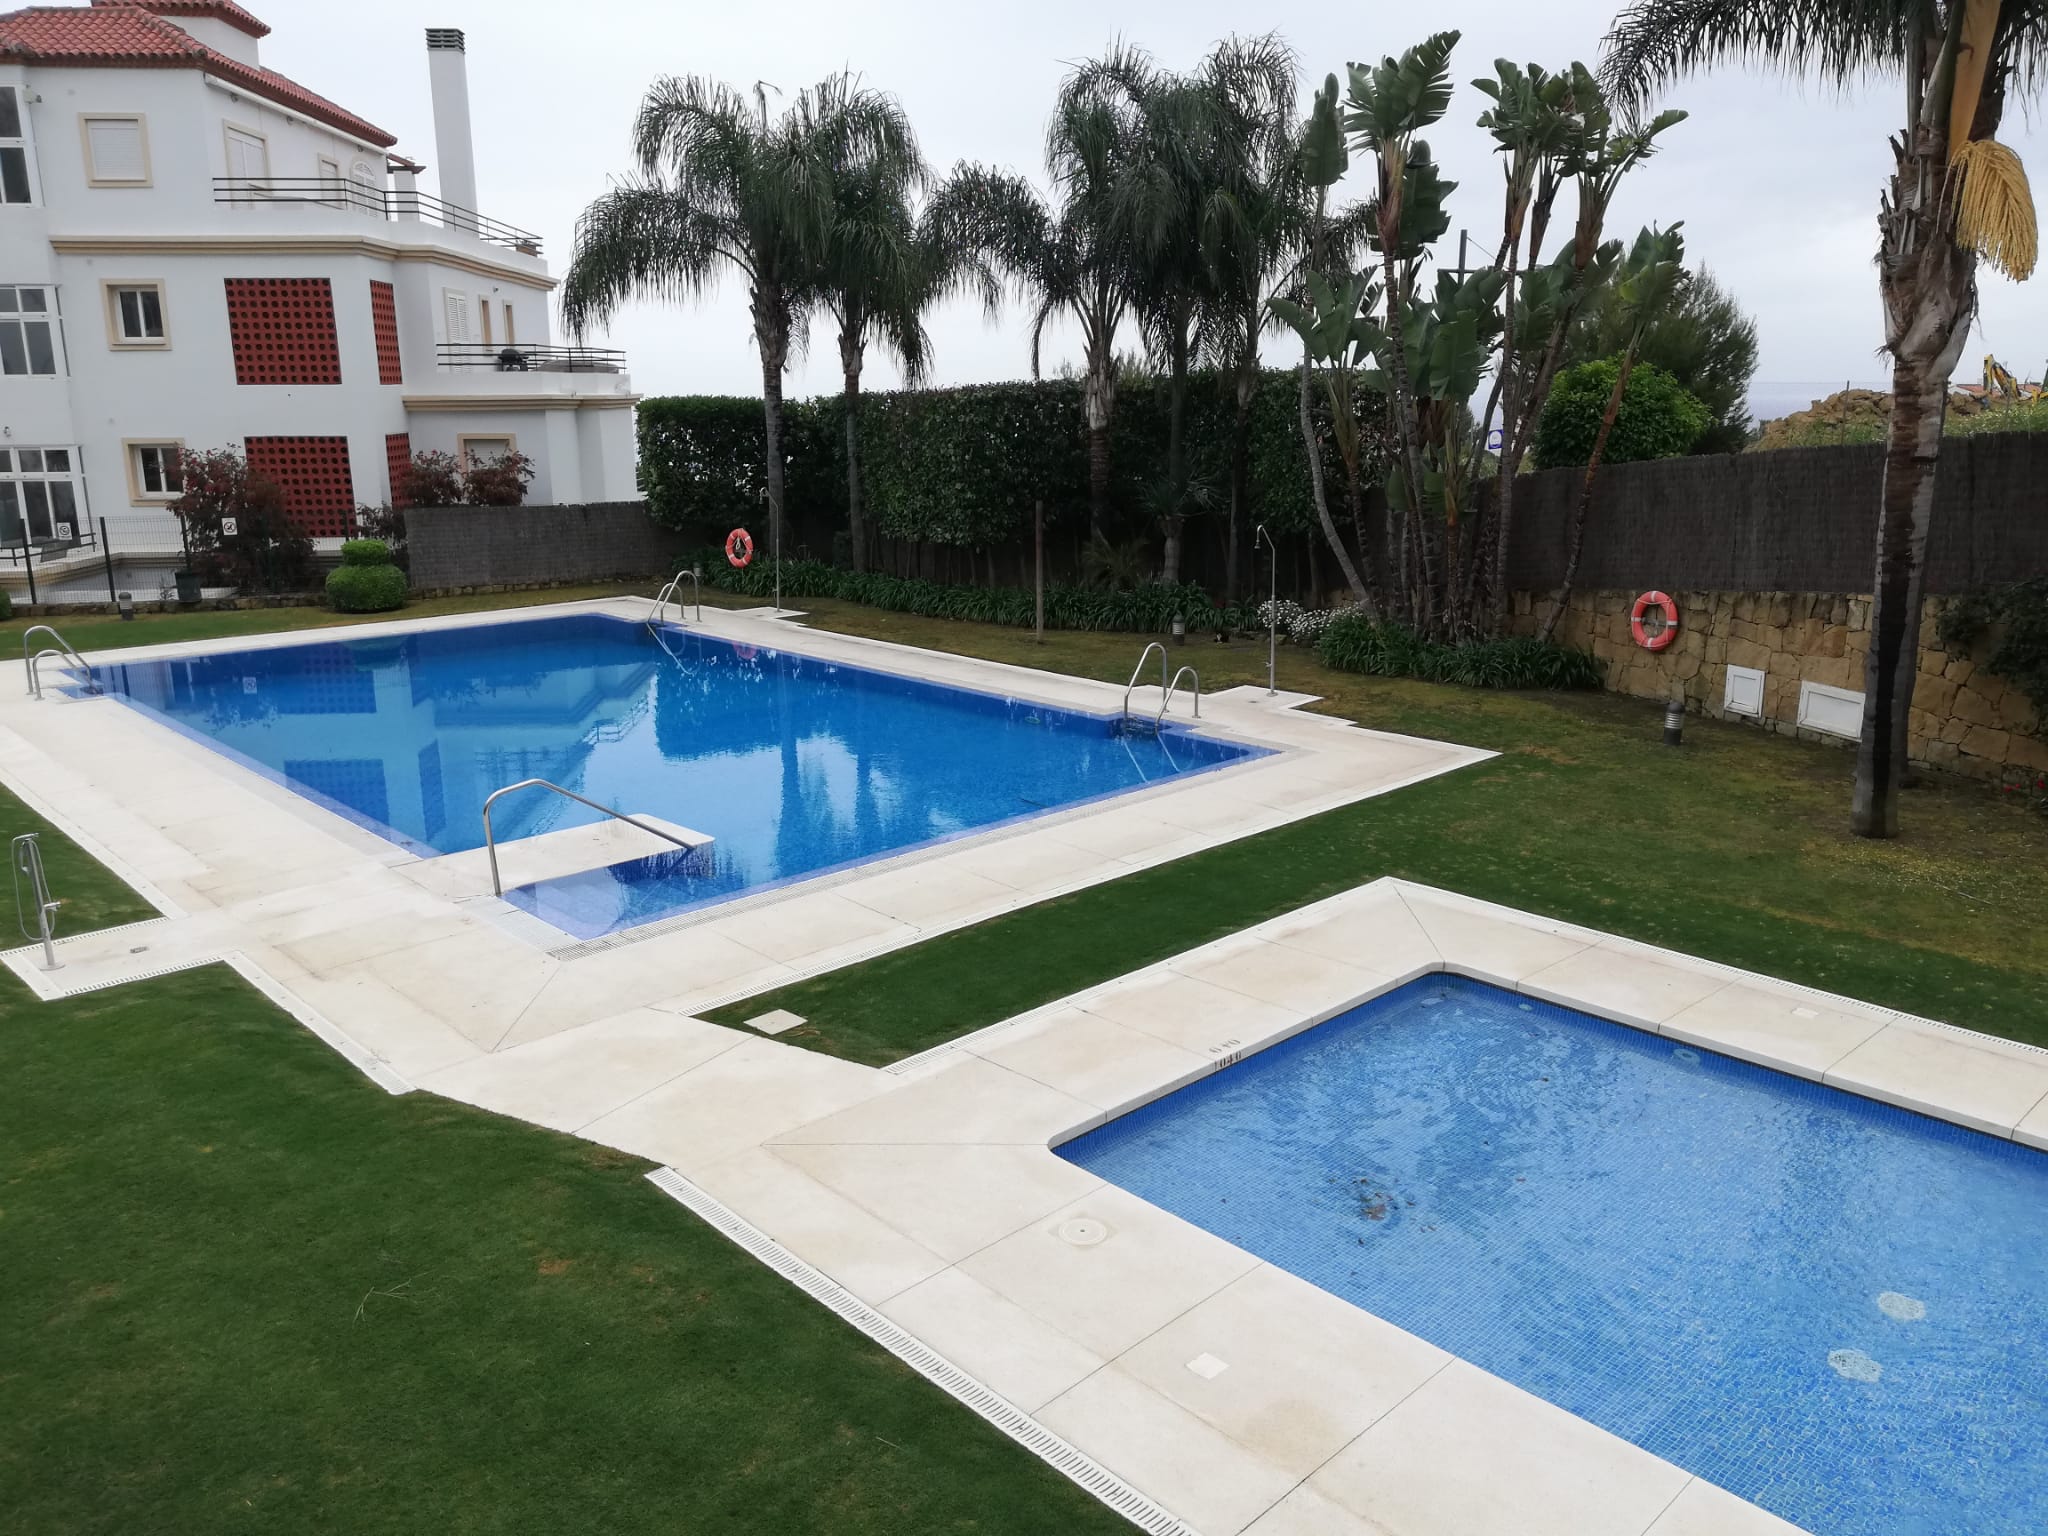 2 bedroom apartment for rent in Manilva with sea view - thumb - mibgroup.es